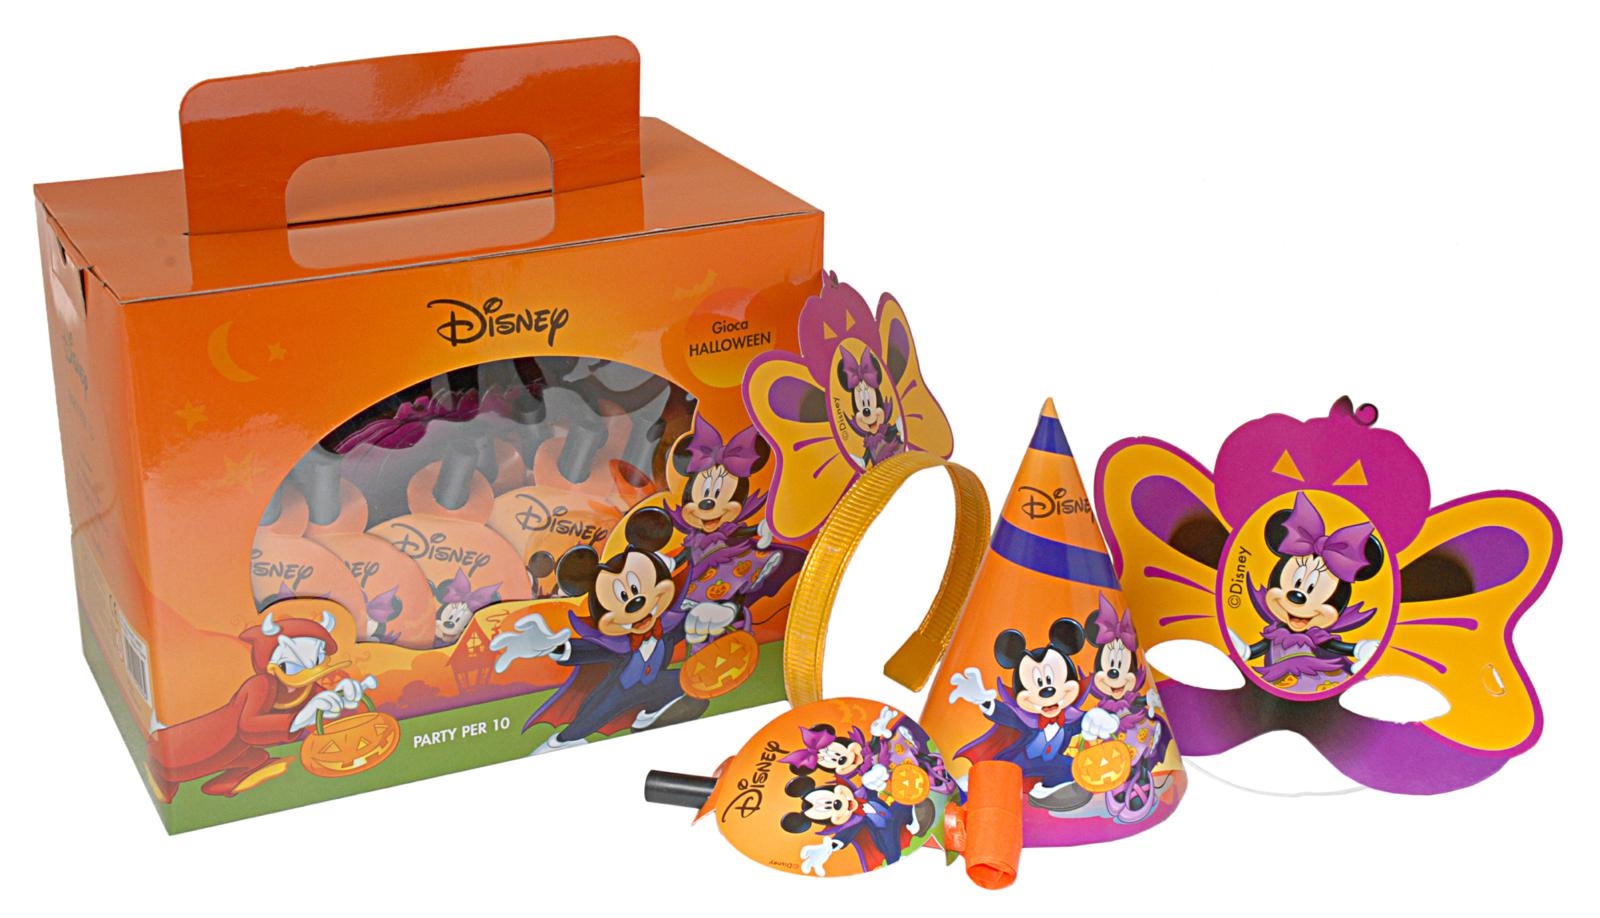 Box cot lon Mickey mouse/Minnie halloween per 10 pers